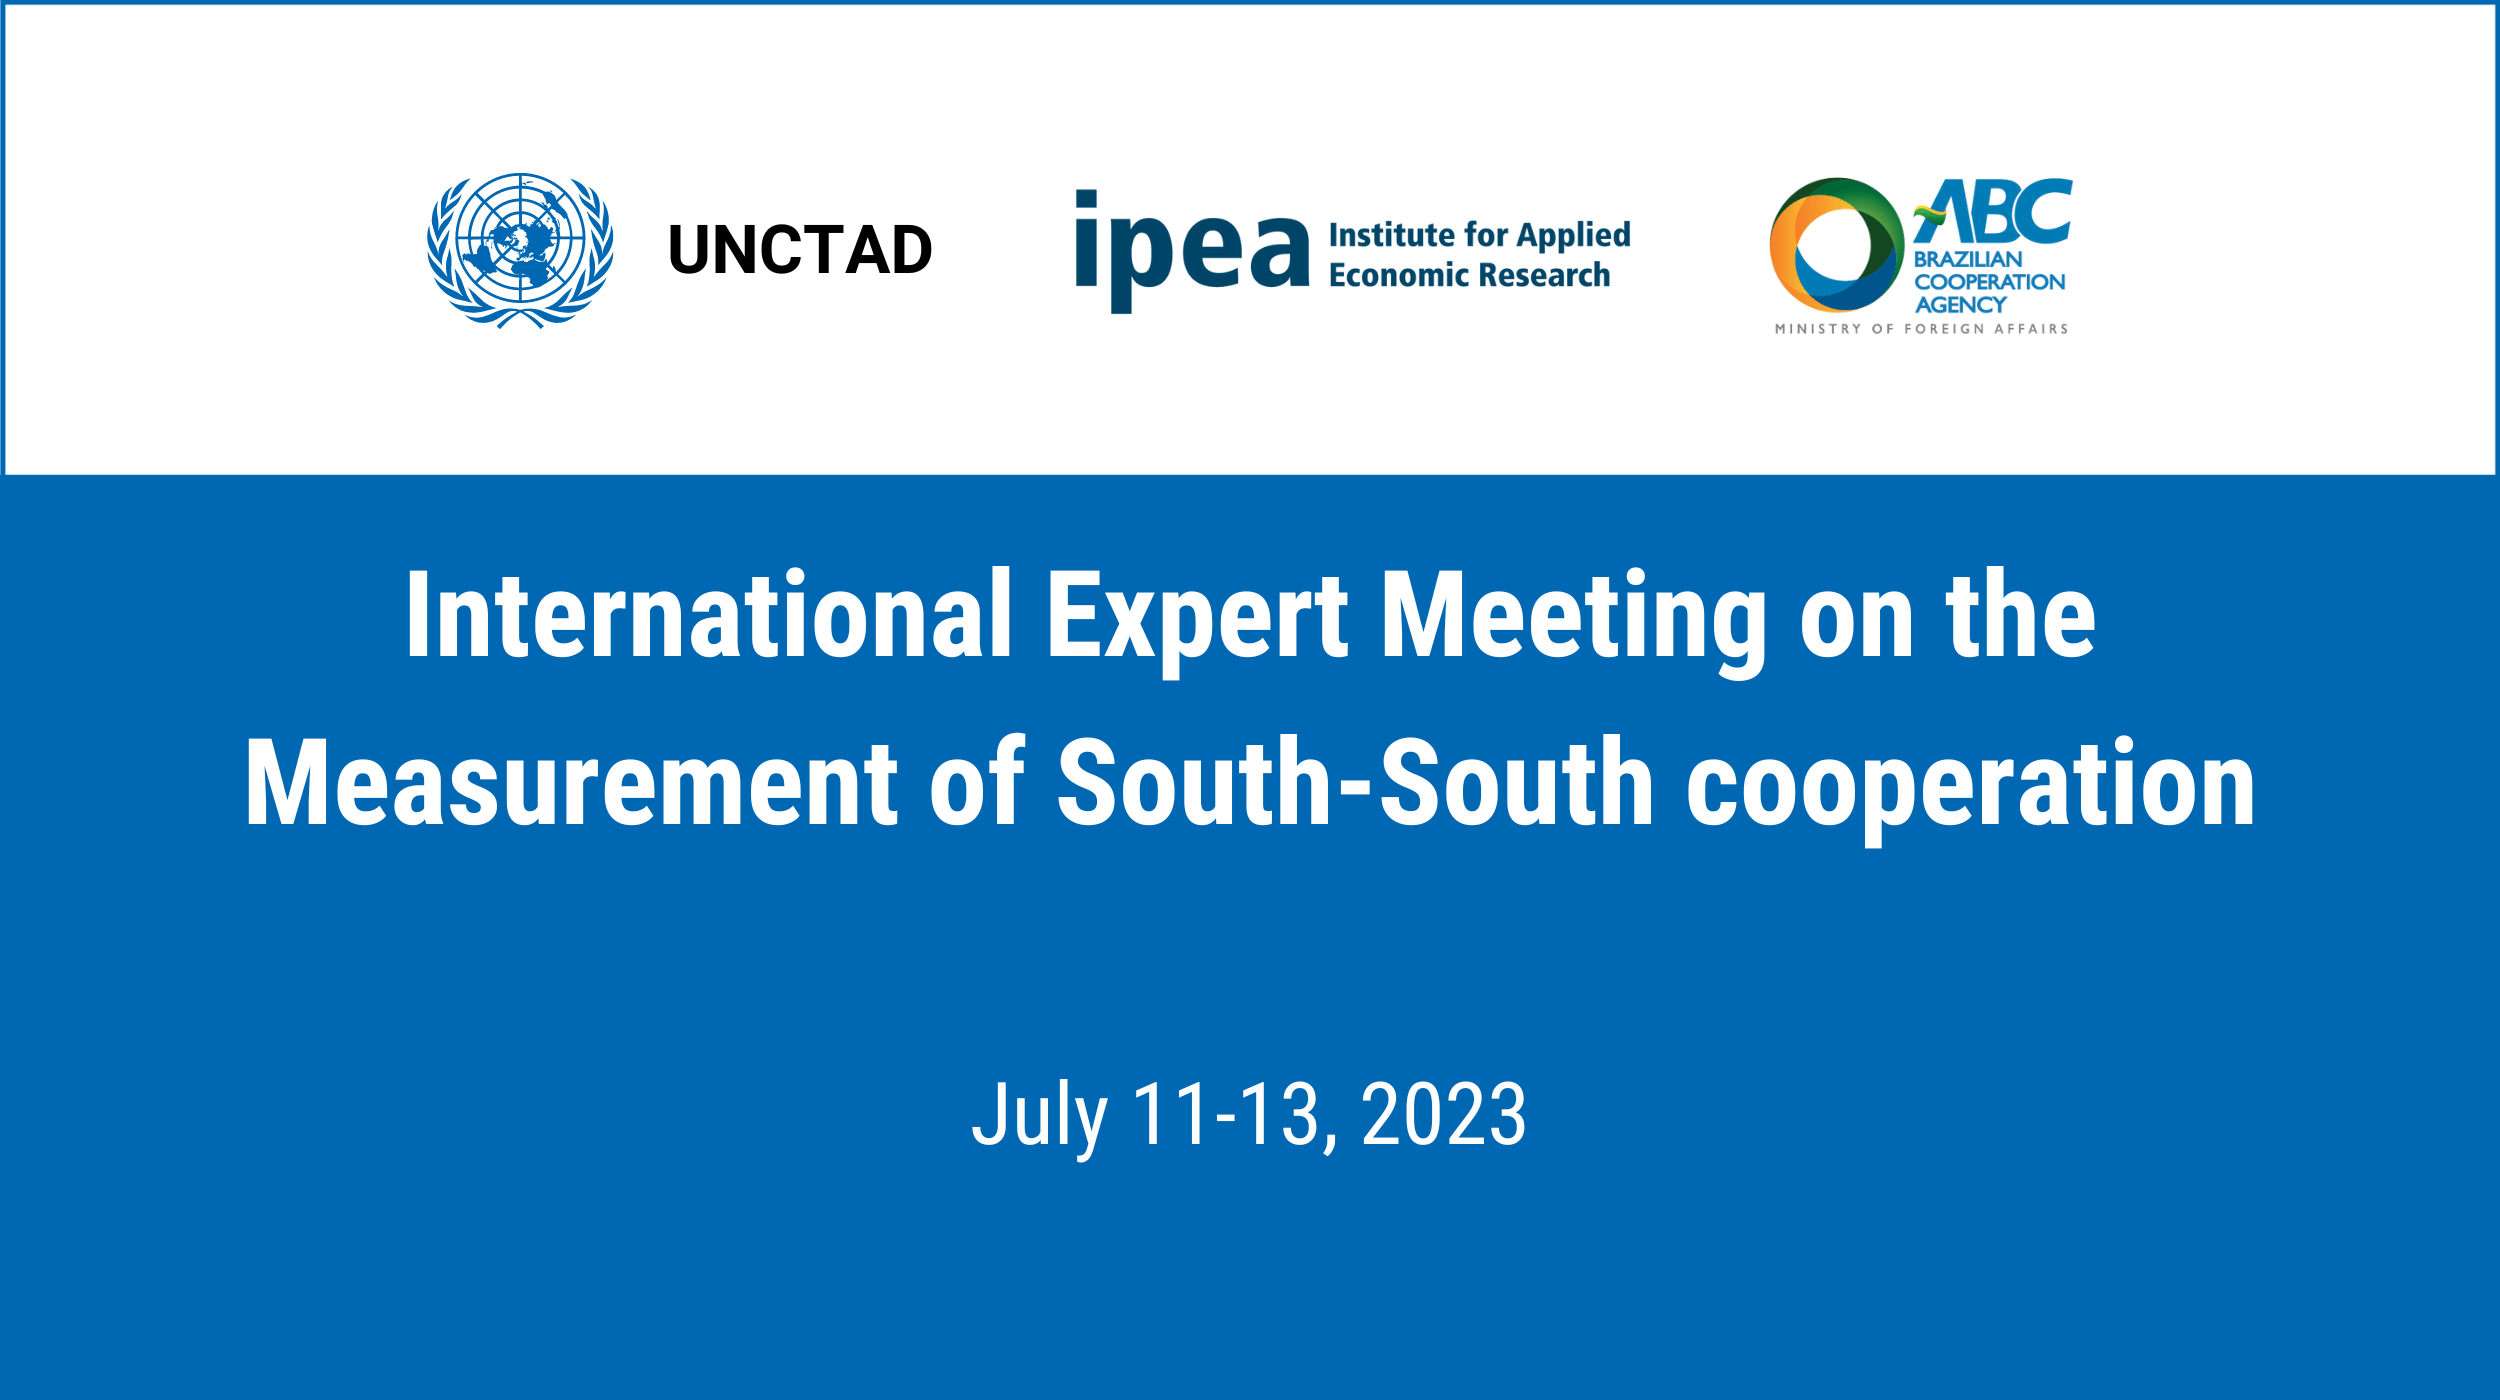 International Expert Meeting on the Measurement of South-South cooperation